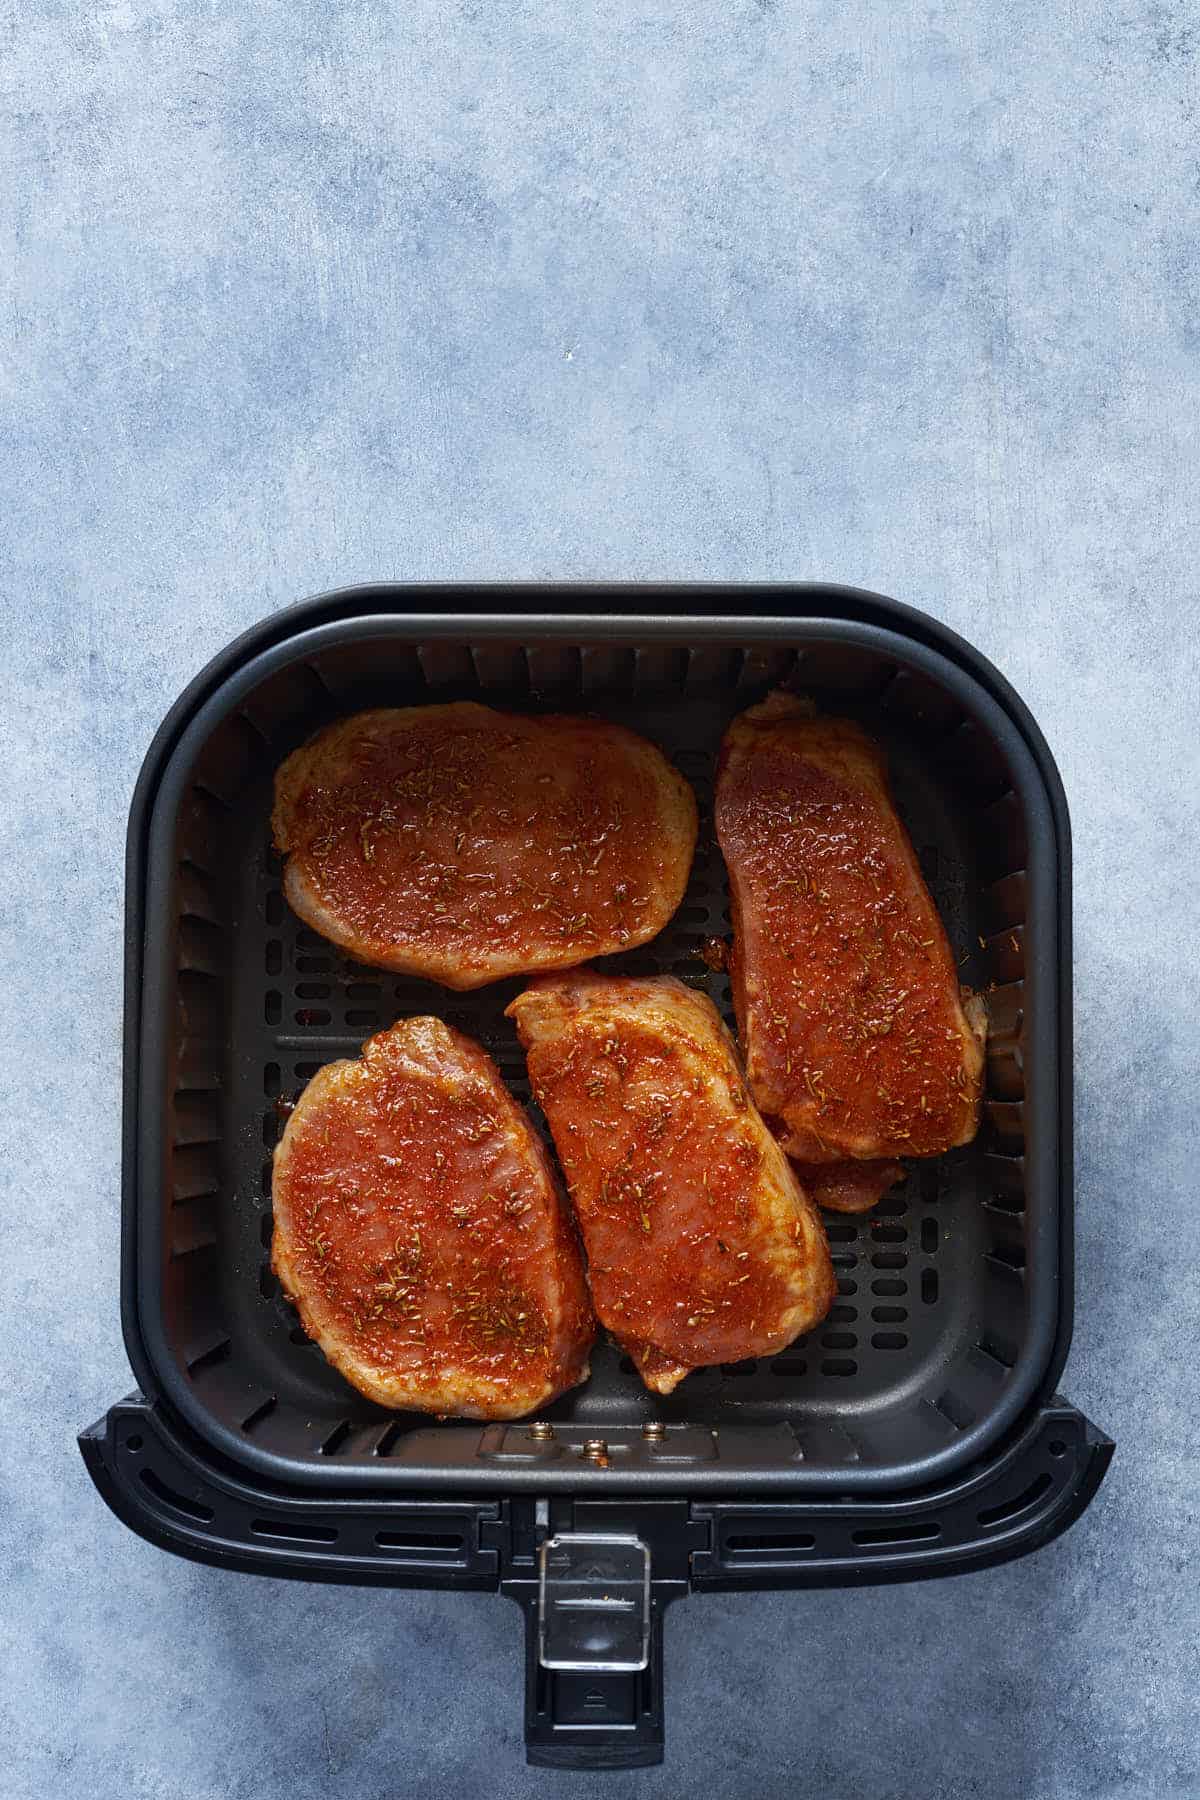 Pork chops brushed with oil mixture in the air fryer basket.